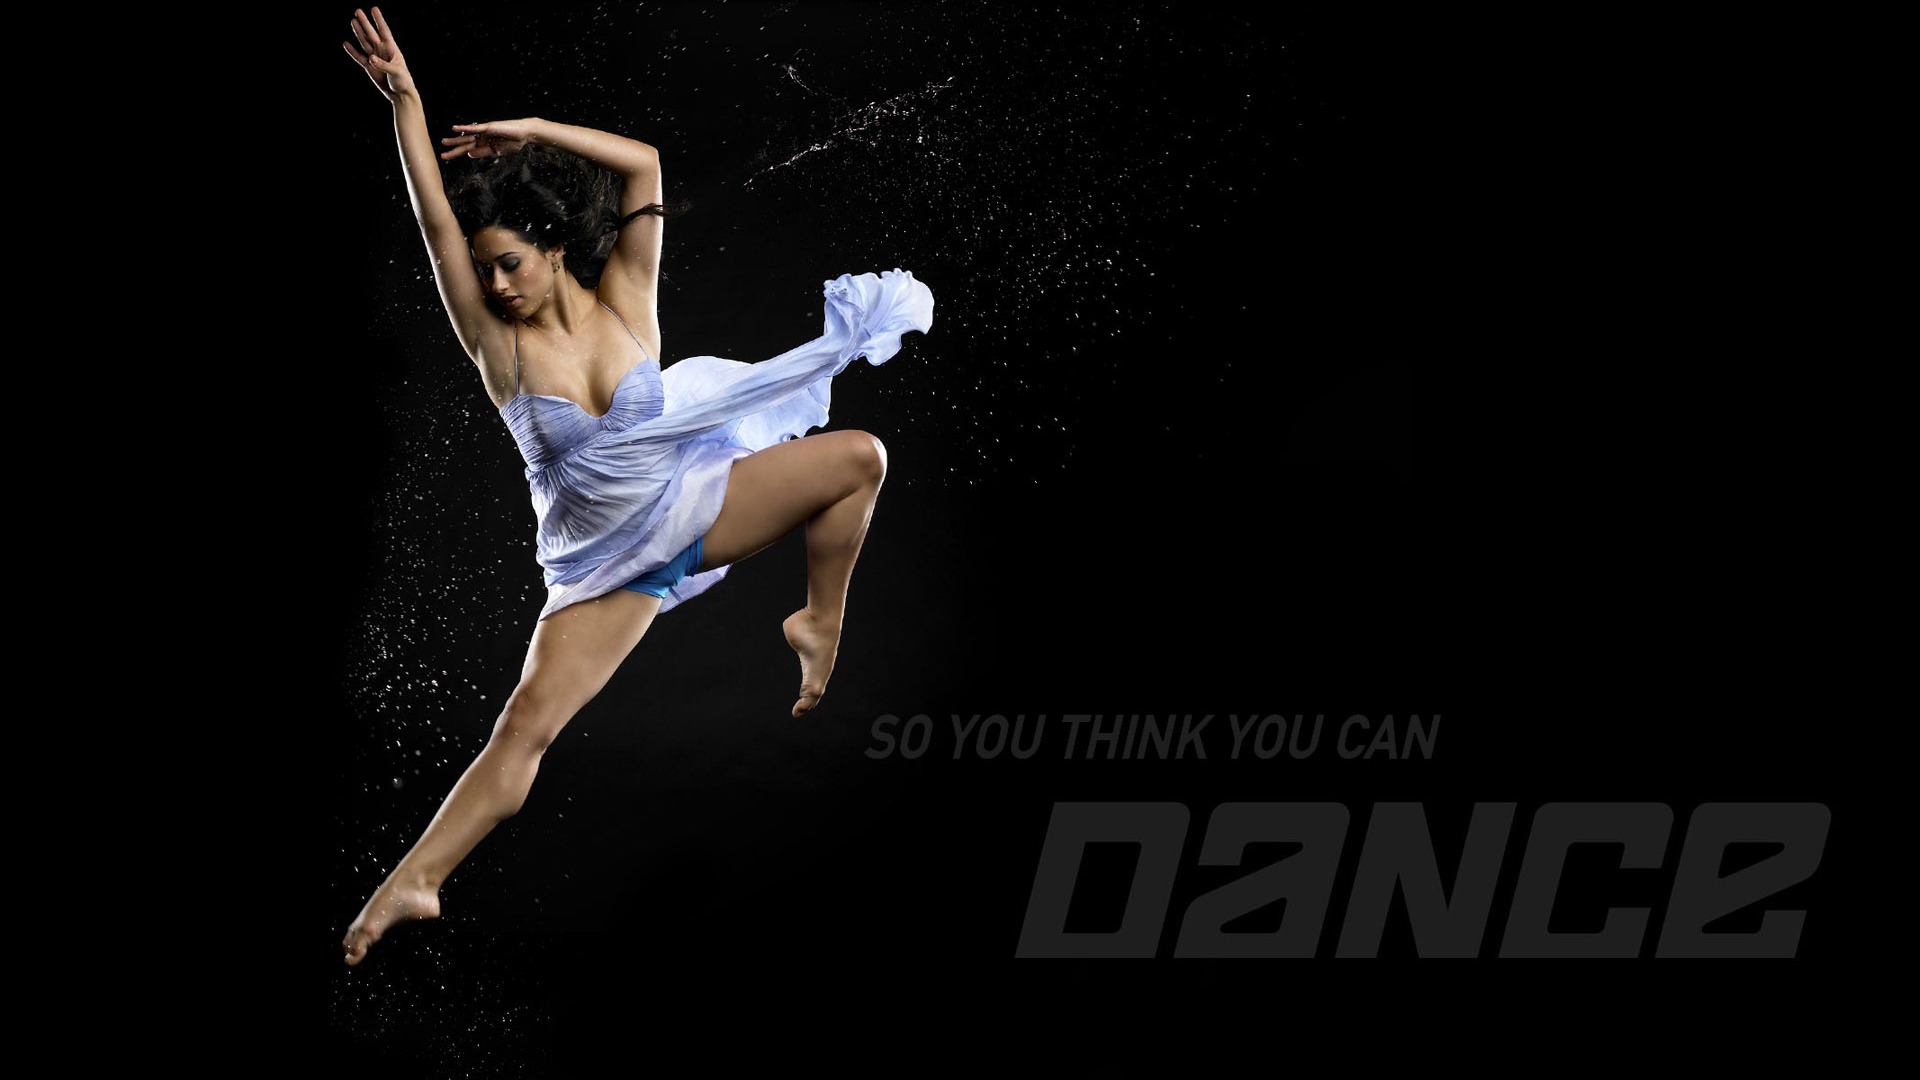 So You Think You Can Dance Wallpaper (1) #3 - 1920x1080